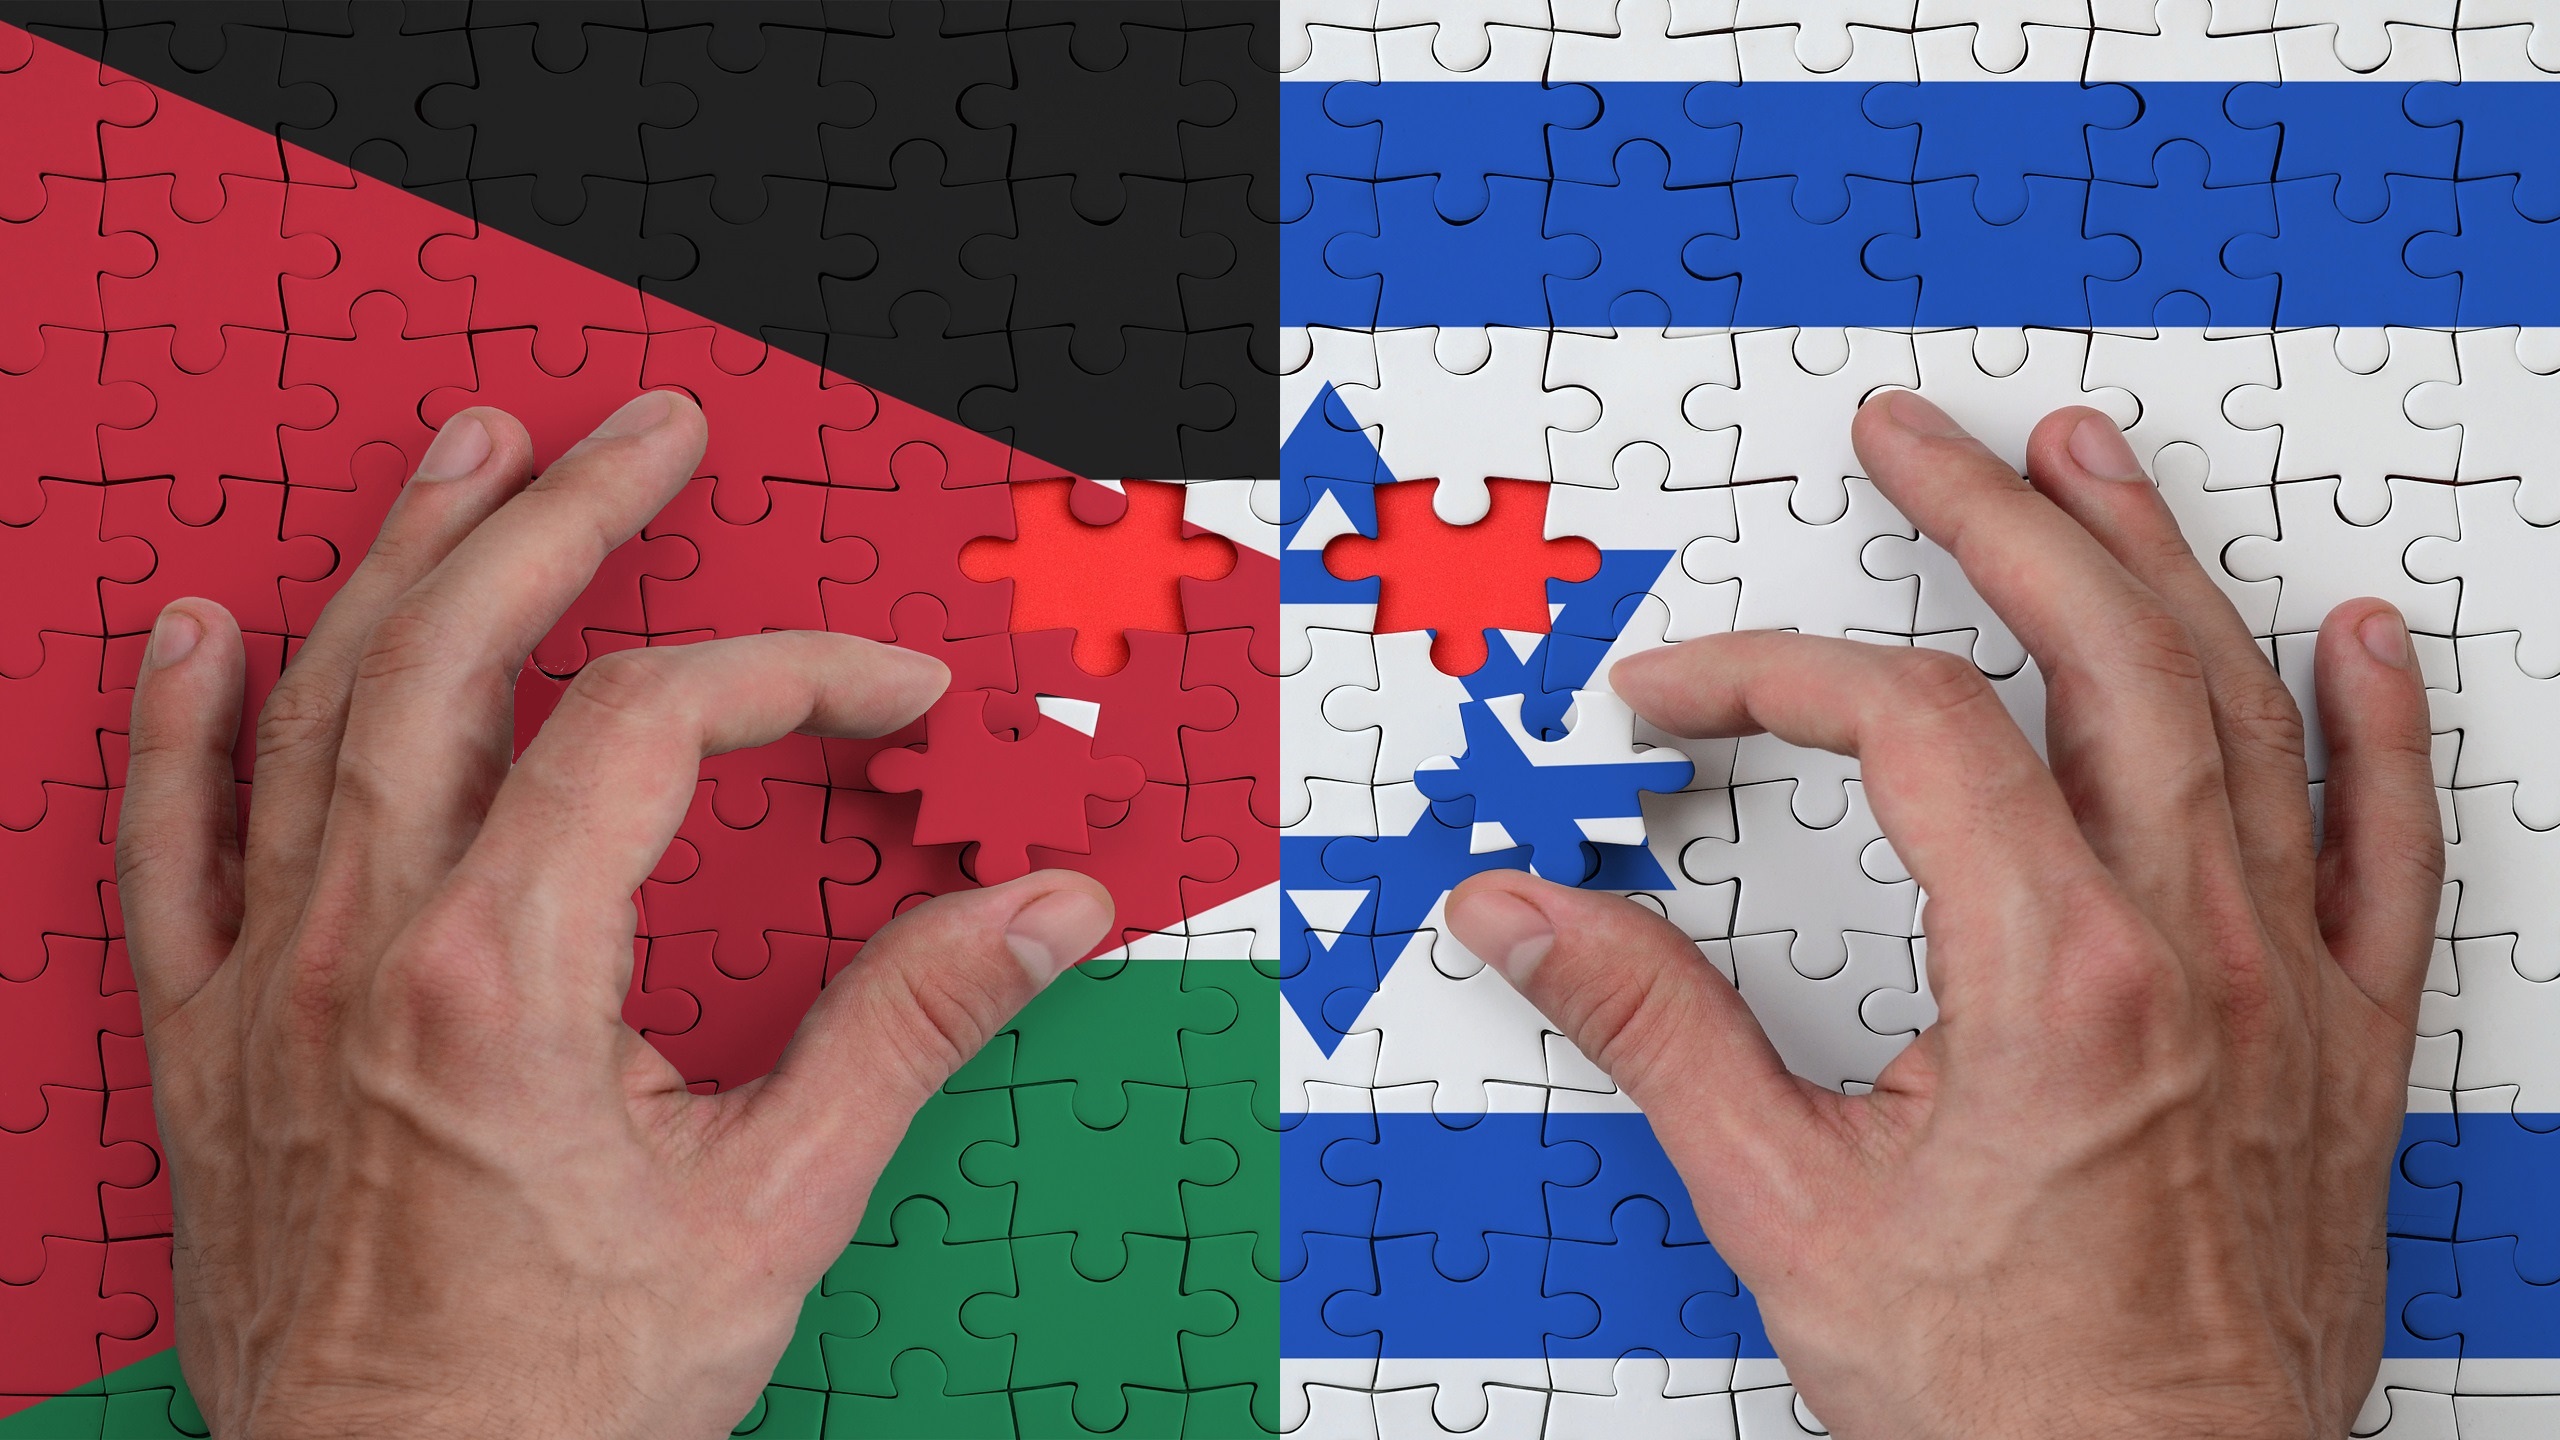 Jordan Advocates for Palestinian Self-Determination in Path to Peace